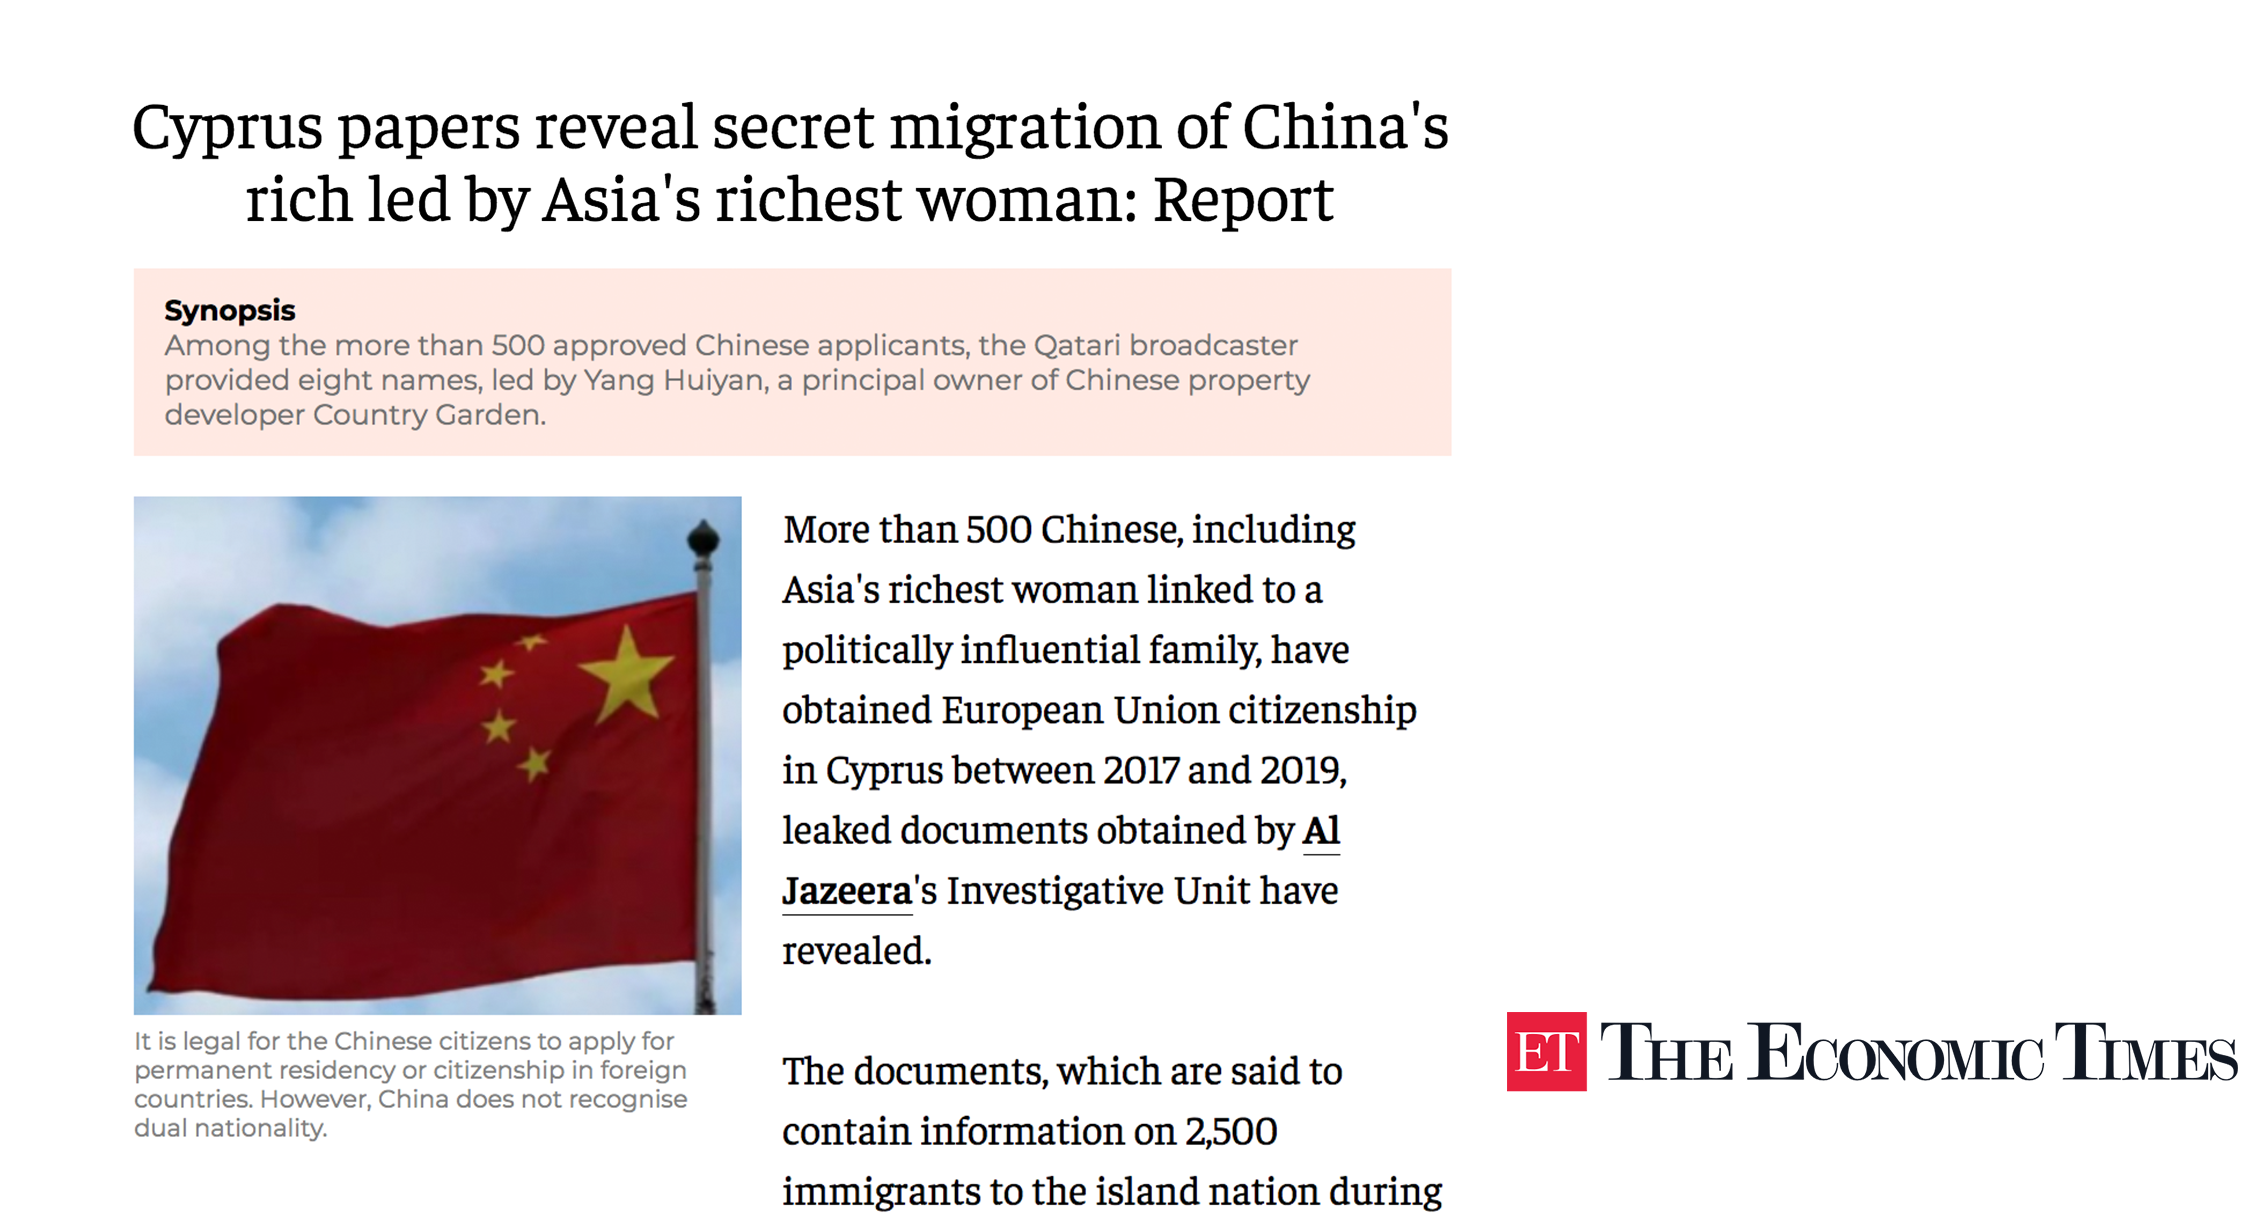 India Times: Cyprus papers reveal secret migration of China's rich led by Asia's richest woman